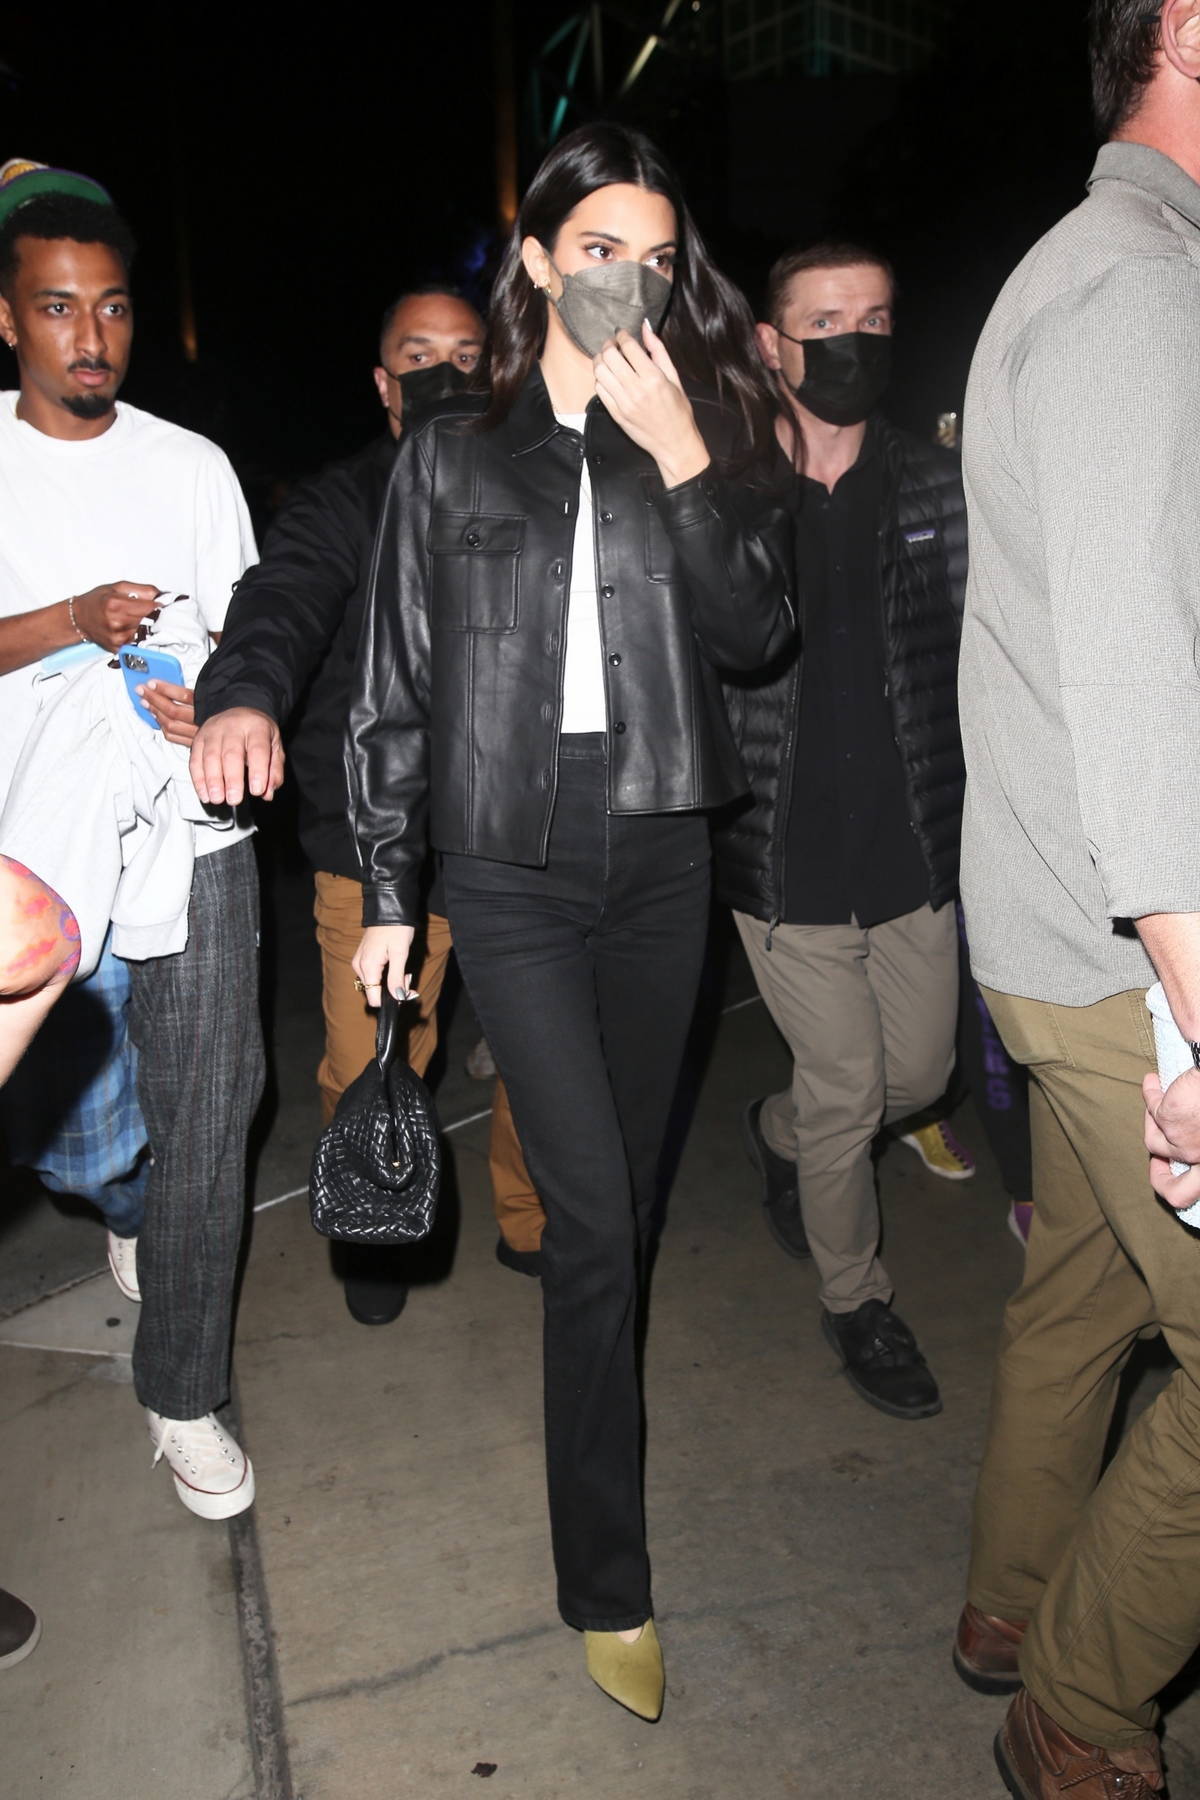 Hailey Bieber and Kendall Jenner Match in Leather Jackets at